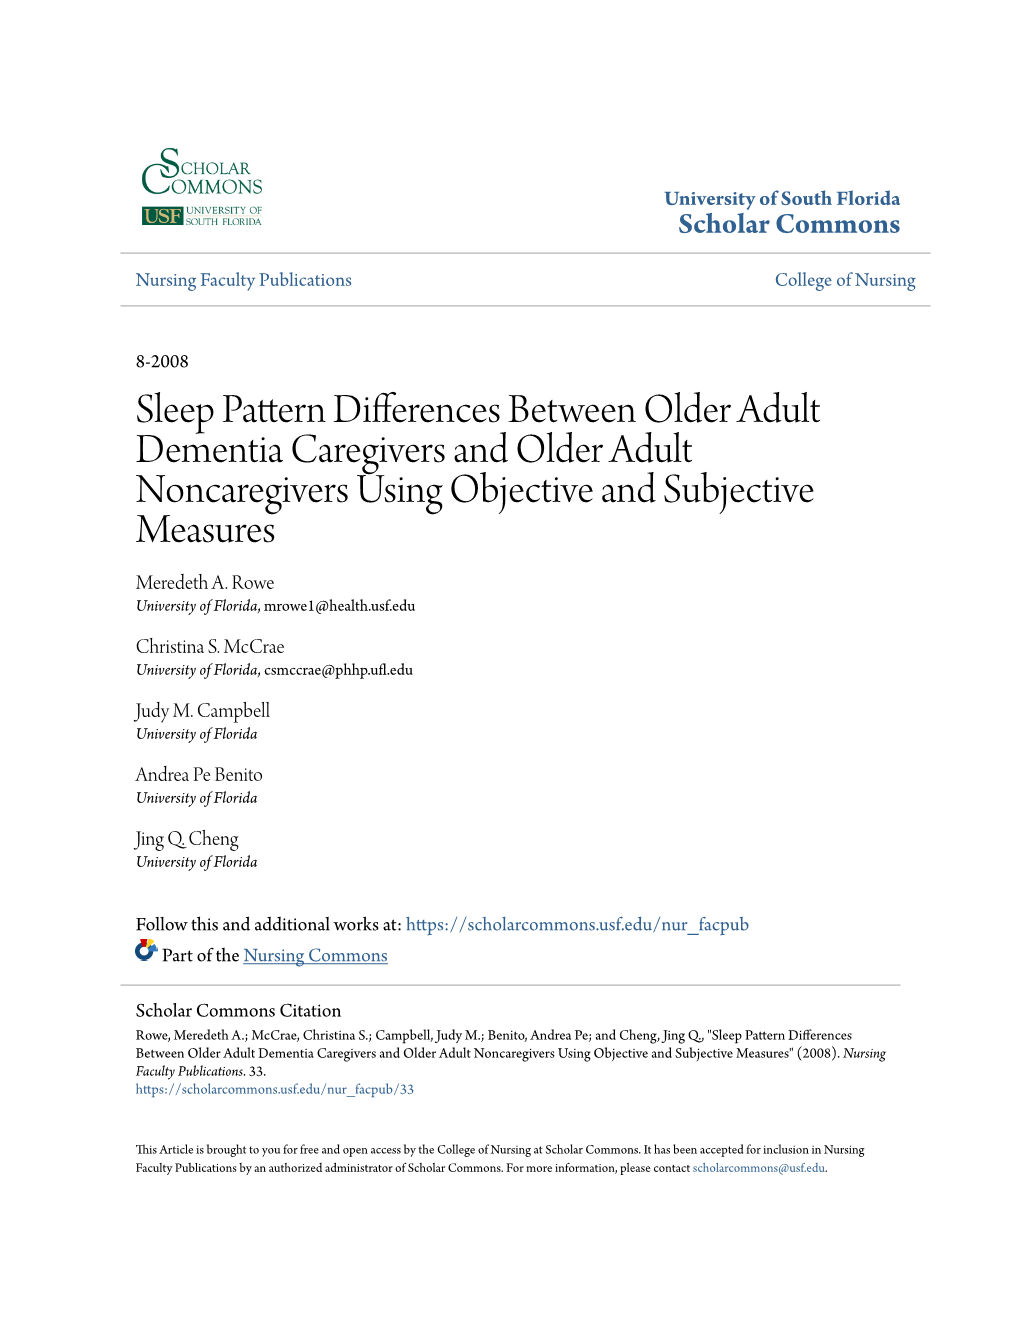 Sleep Pattern Differences Between Older Adult Dementia Caregivers and Older Adult Noncaregivers Using Objective and Subjective Measures Meredeth A